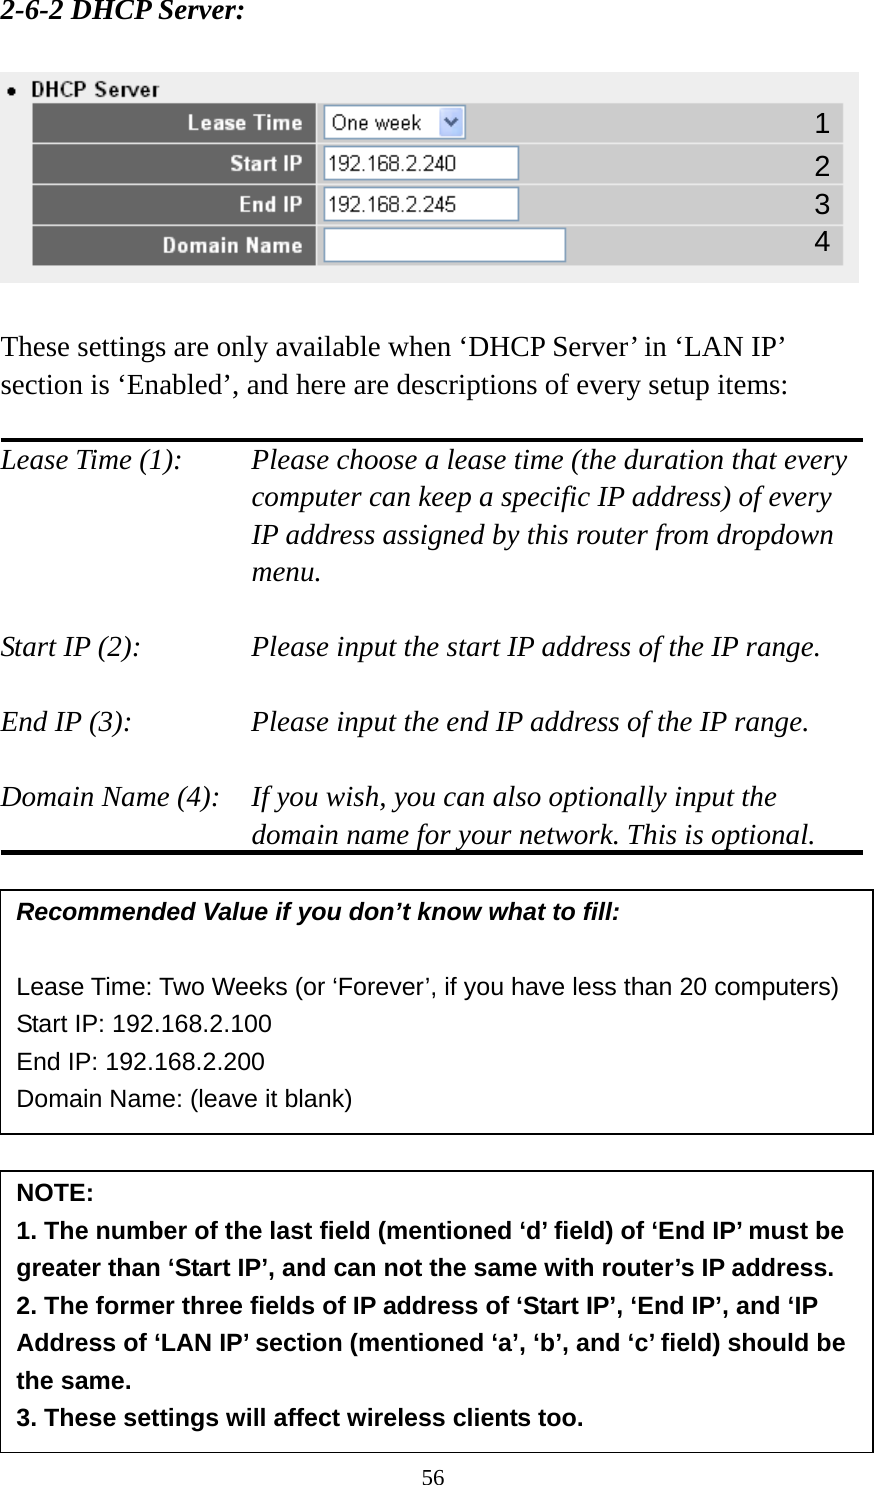 56 2-6-2 DHCP Server:    These settings are only available when ‘DHCP Server’ in ‘LAN IP’ section is ‘Enabled’, and here are descriptions of every setup items:  Lease Time (1):    Please choose a lease time (the duration that every computer can keep a specific IP address) of every IP address assigned by this router from dropdown menu.  Start IP (2):      Please input the start IP address of the IP range.  End IP (3):       Please input the end IP address of the IP range.  Domain Name (4):    If you wish, you can also optionally input the domain name for your network. This is optional.                Recommended Value if you don’t know what to fill:  Lease Time: Two Weeks (or ‘Forever’, if you have less than 20 computers) Start IP: 192.168.2.100 End IP: 192.168.2.200 Domain Name: (leave it blank) NOTE:  1. The number of the last field (mentioned ‘d’ field) of ‘End IP’ must be greater than ‘Start IP’, and can not the same with router’s IP address. 2. The former three fields of IP address of ‘Start IP’, ‘End IP’, and ‘IP Address of ‘LAN IP’ section (mentioned ‘a’, ‘b’, and ‘c’ field) should be the same. 3. These settings will affect wireless clients too. 1 3 4 2 